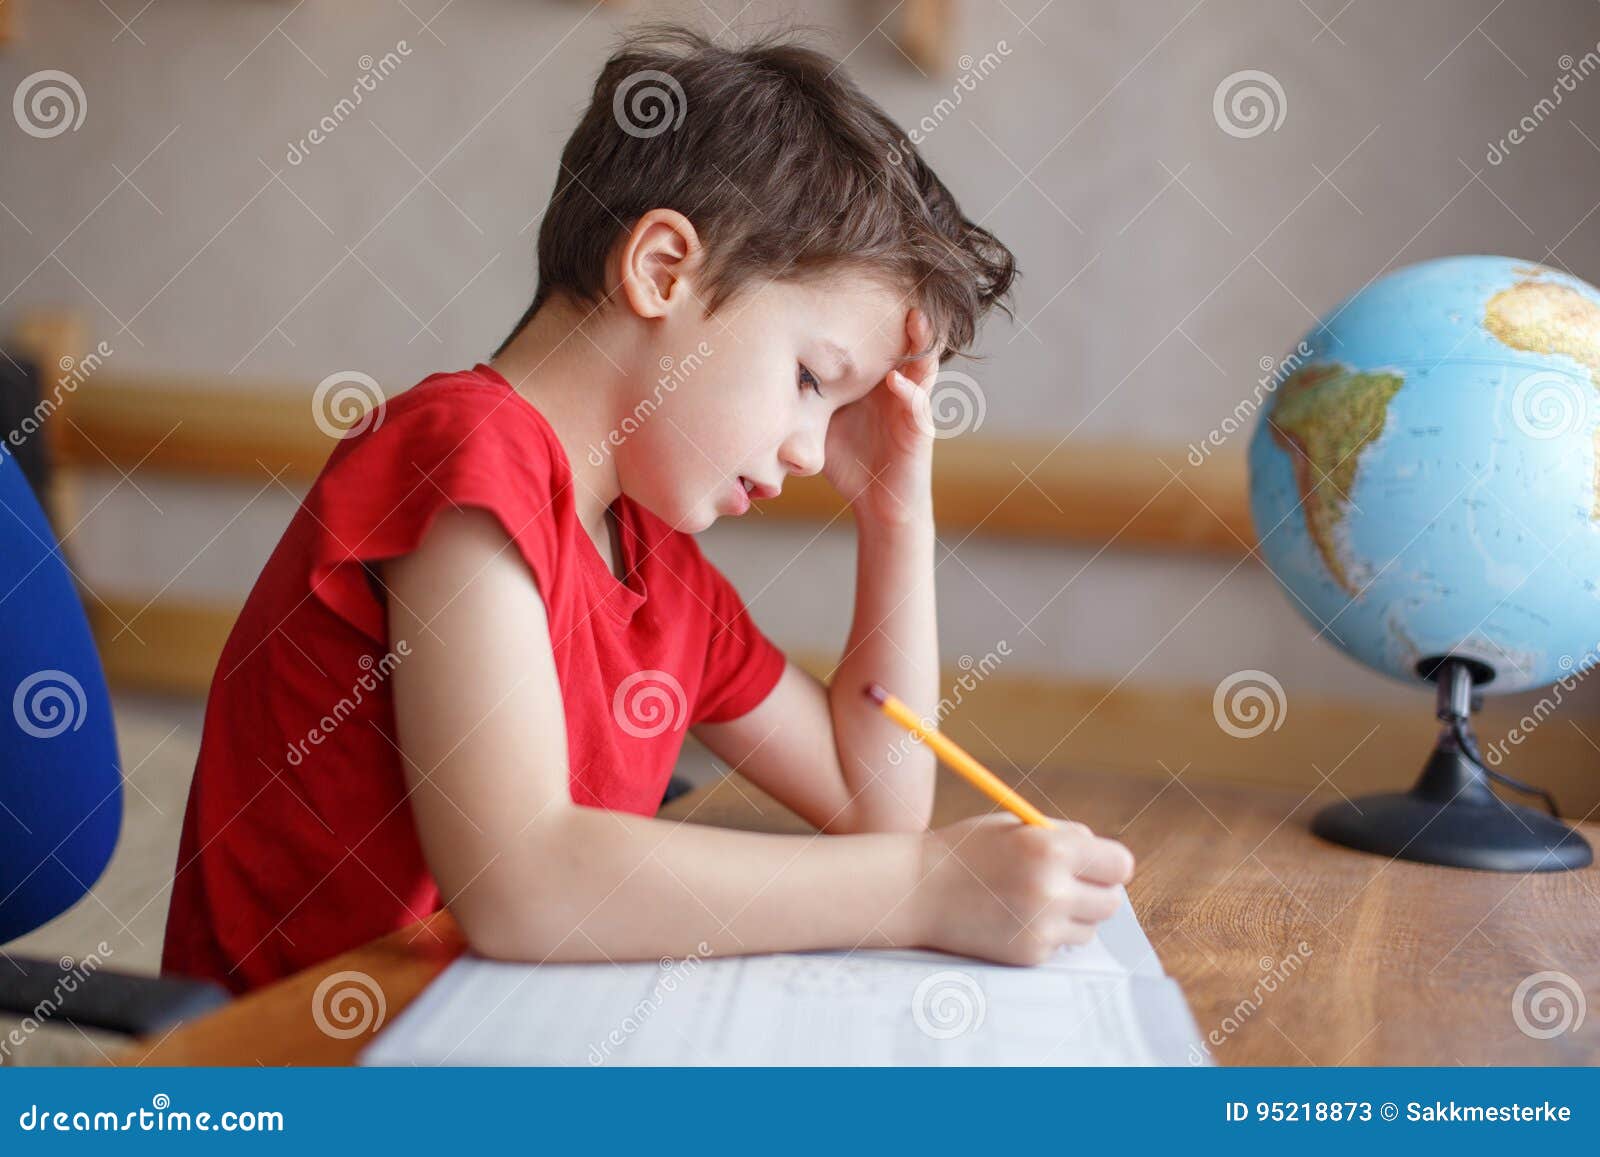 picture of hard homework